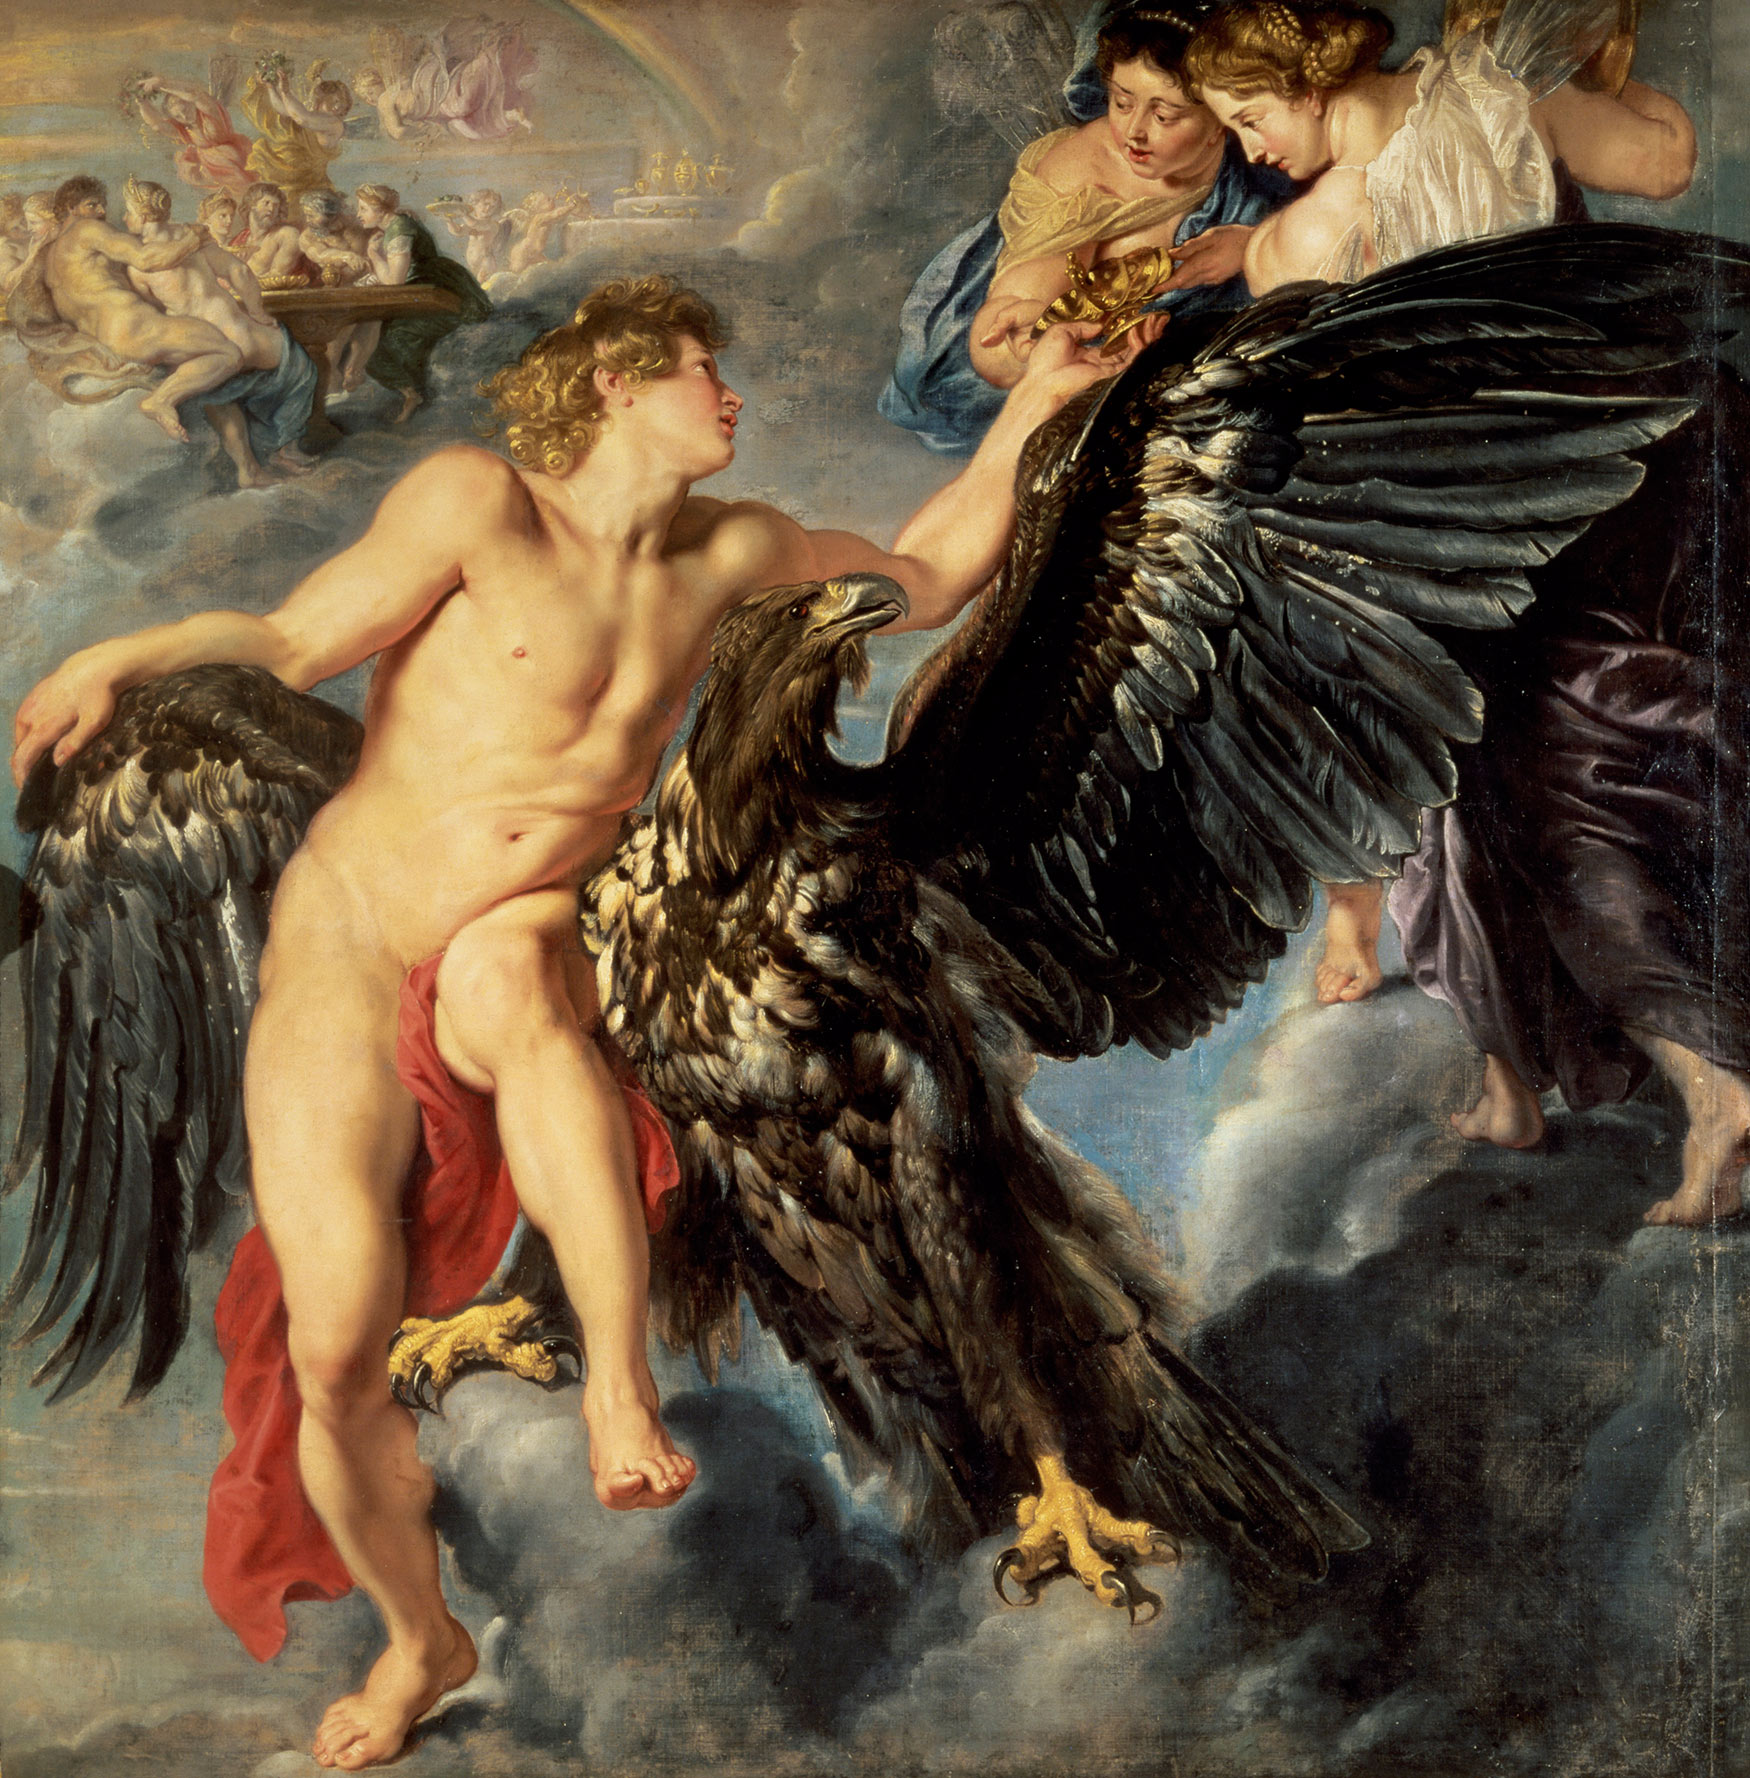 The Kidnapping of Ganymede by Peter Paul Rubens, 1611-12